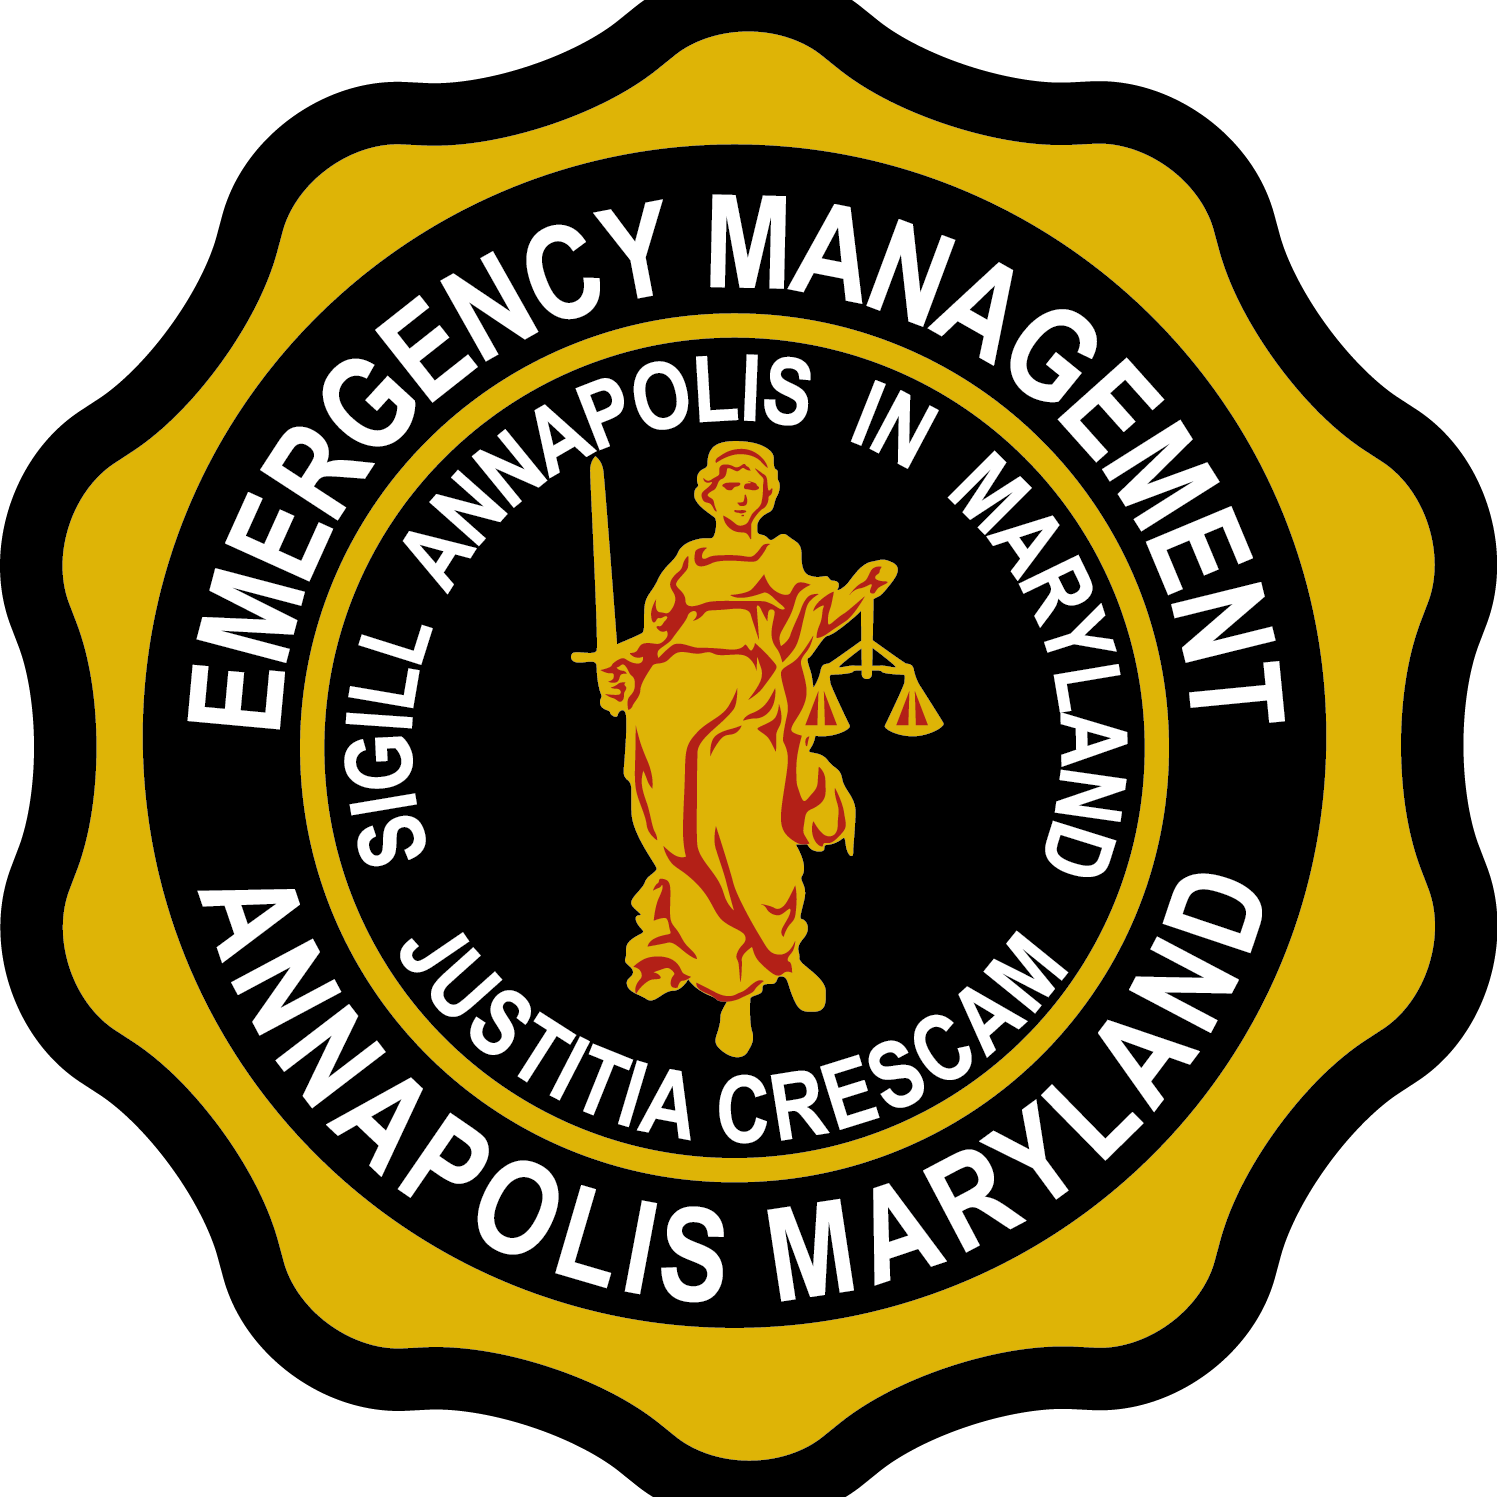 City of Annapolis Office of Emergency Management -  This account is not monitored 24/7. In case of an emergency, please call 911.